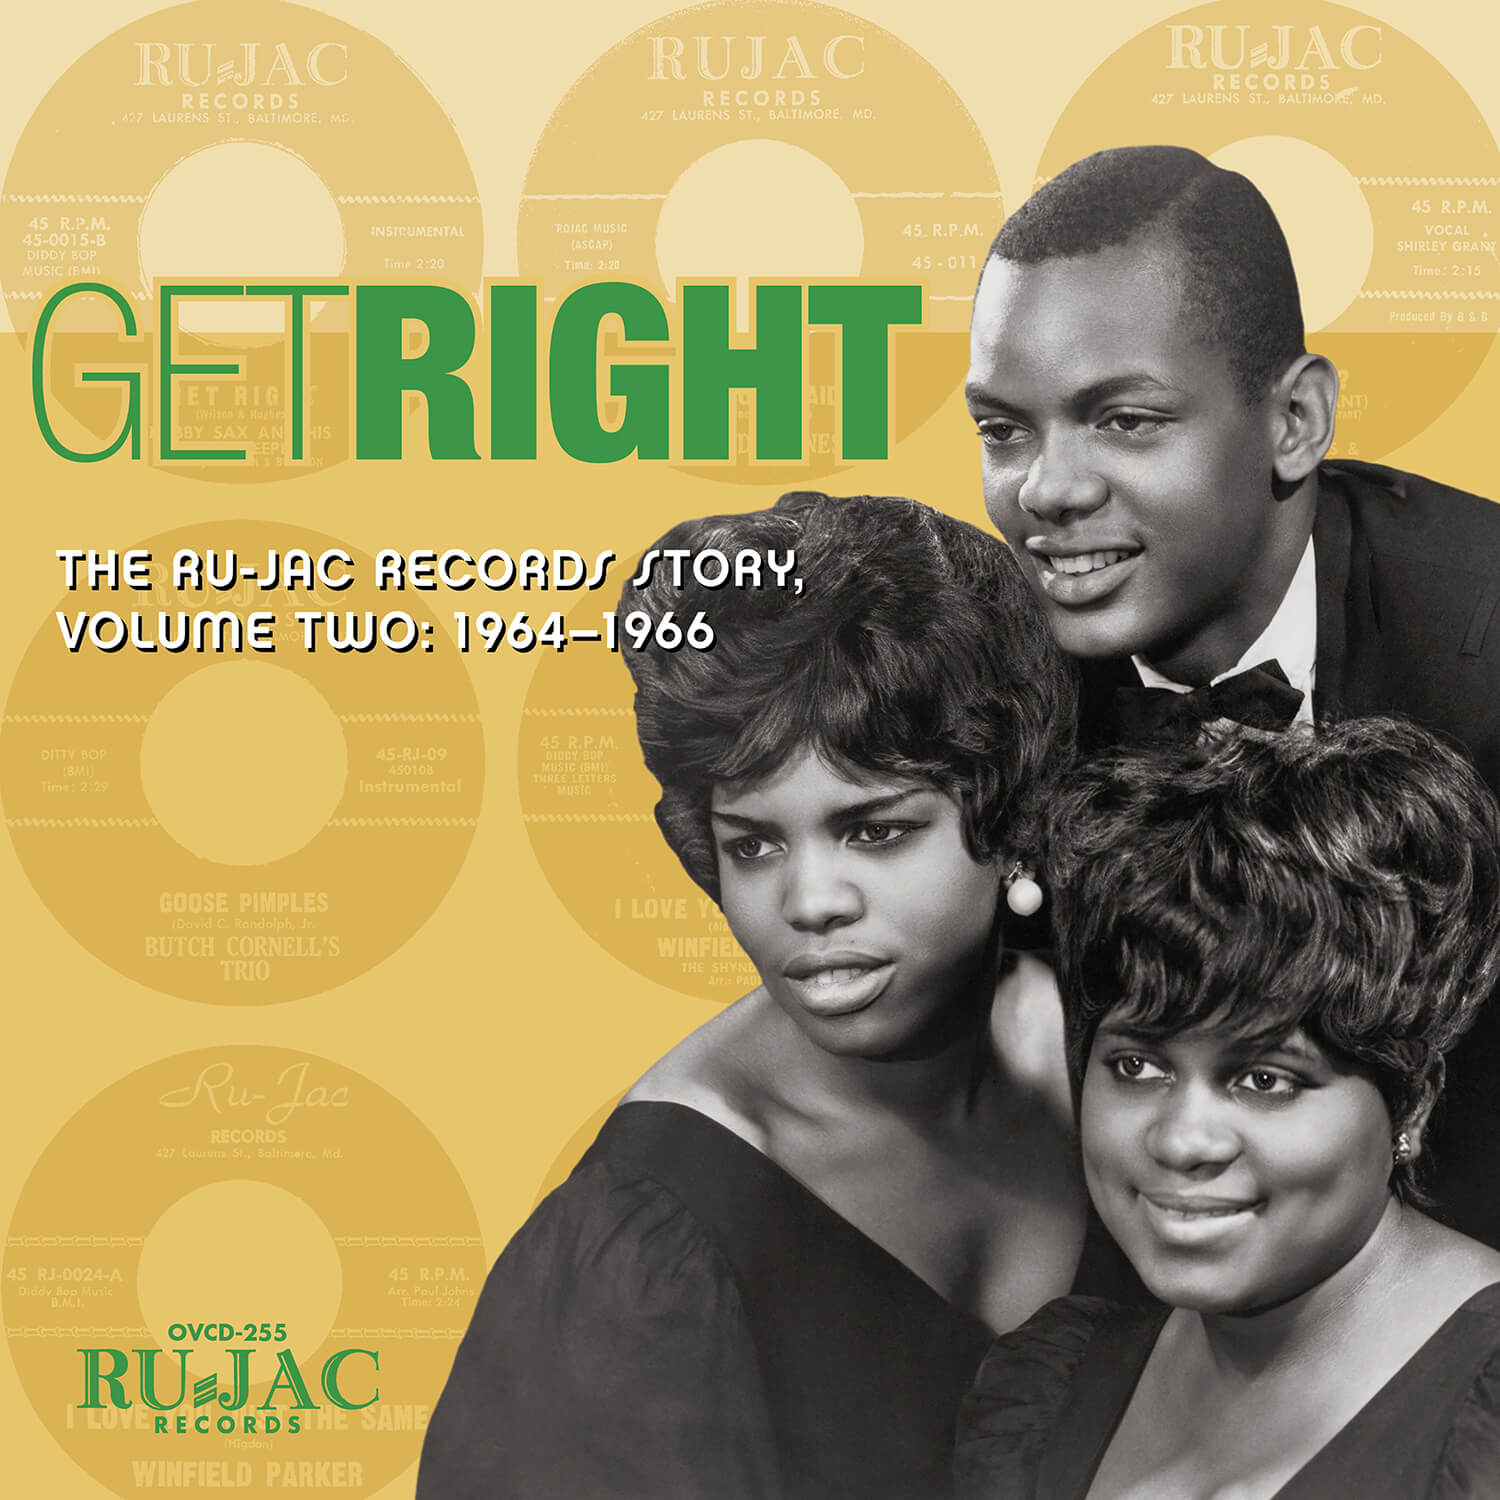 Get Right: The Ru-Jac Records Story, Volume Two: 1964–1966